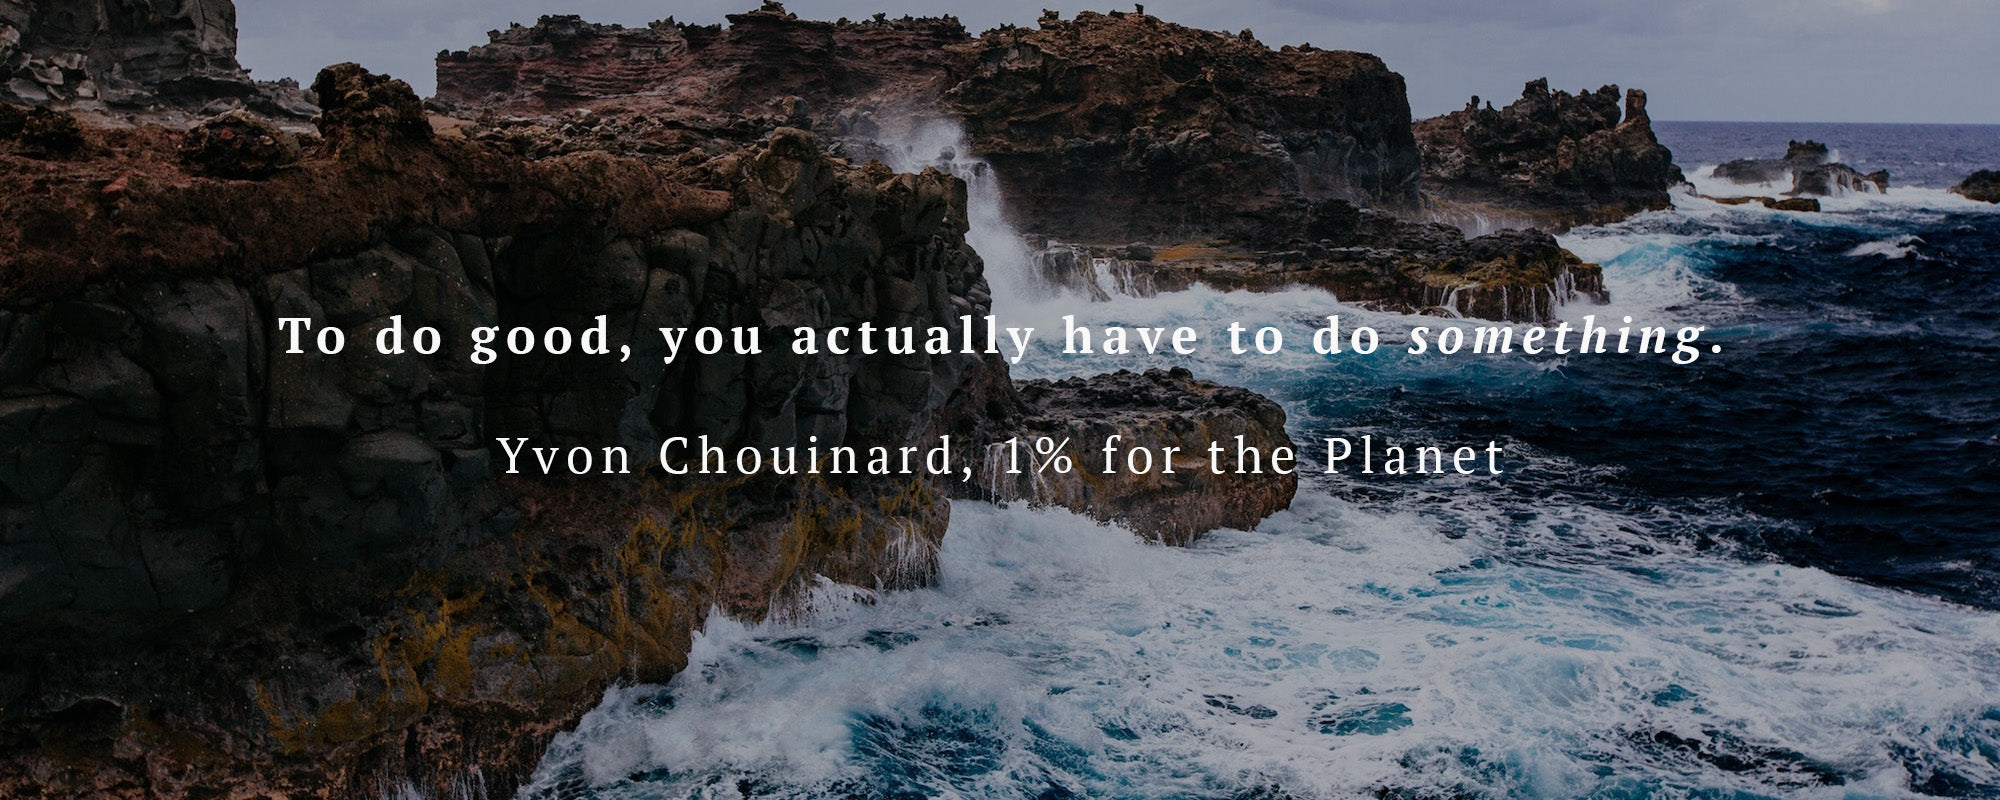 “To do good, you actually have to do something.” — Yvon Chouinard, 1% for the Planet